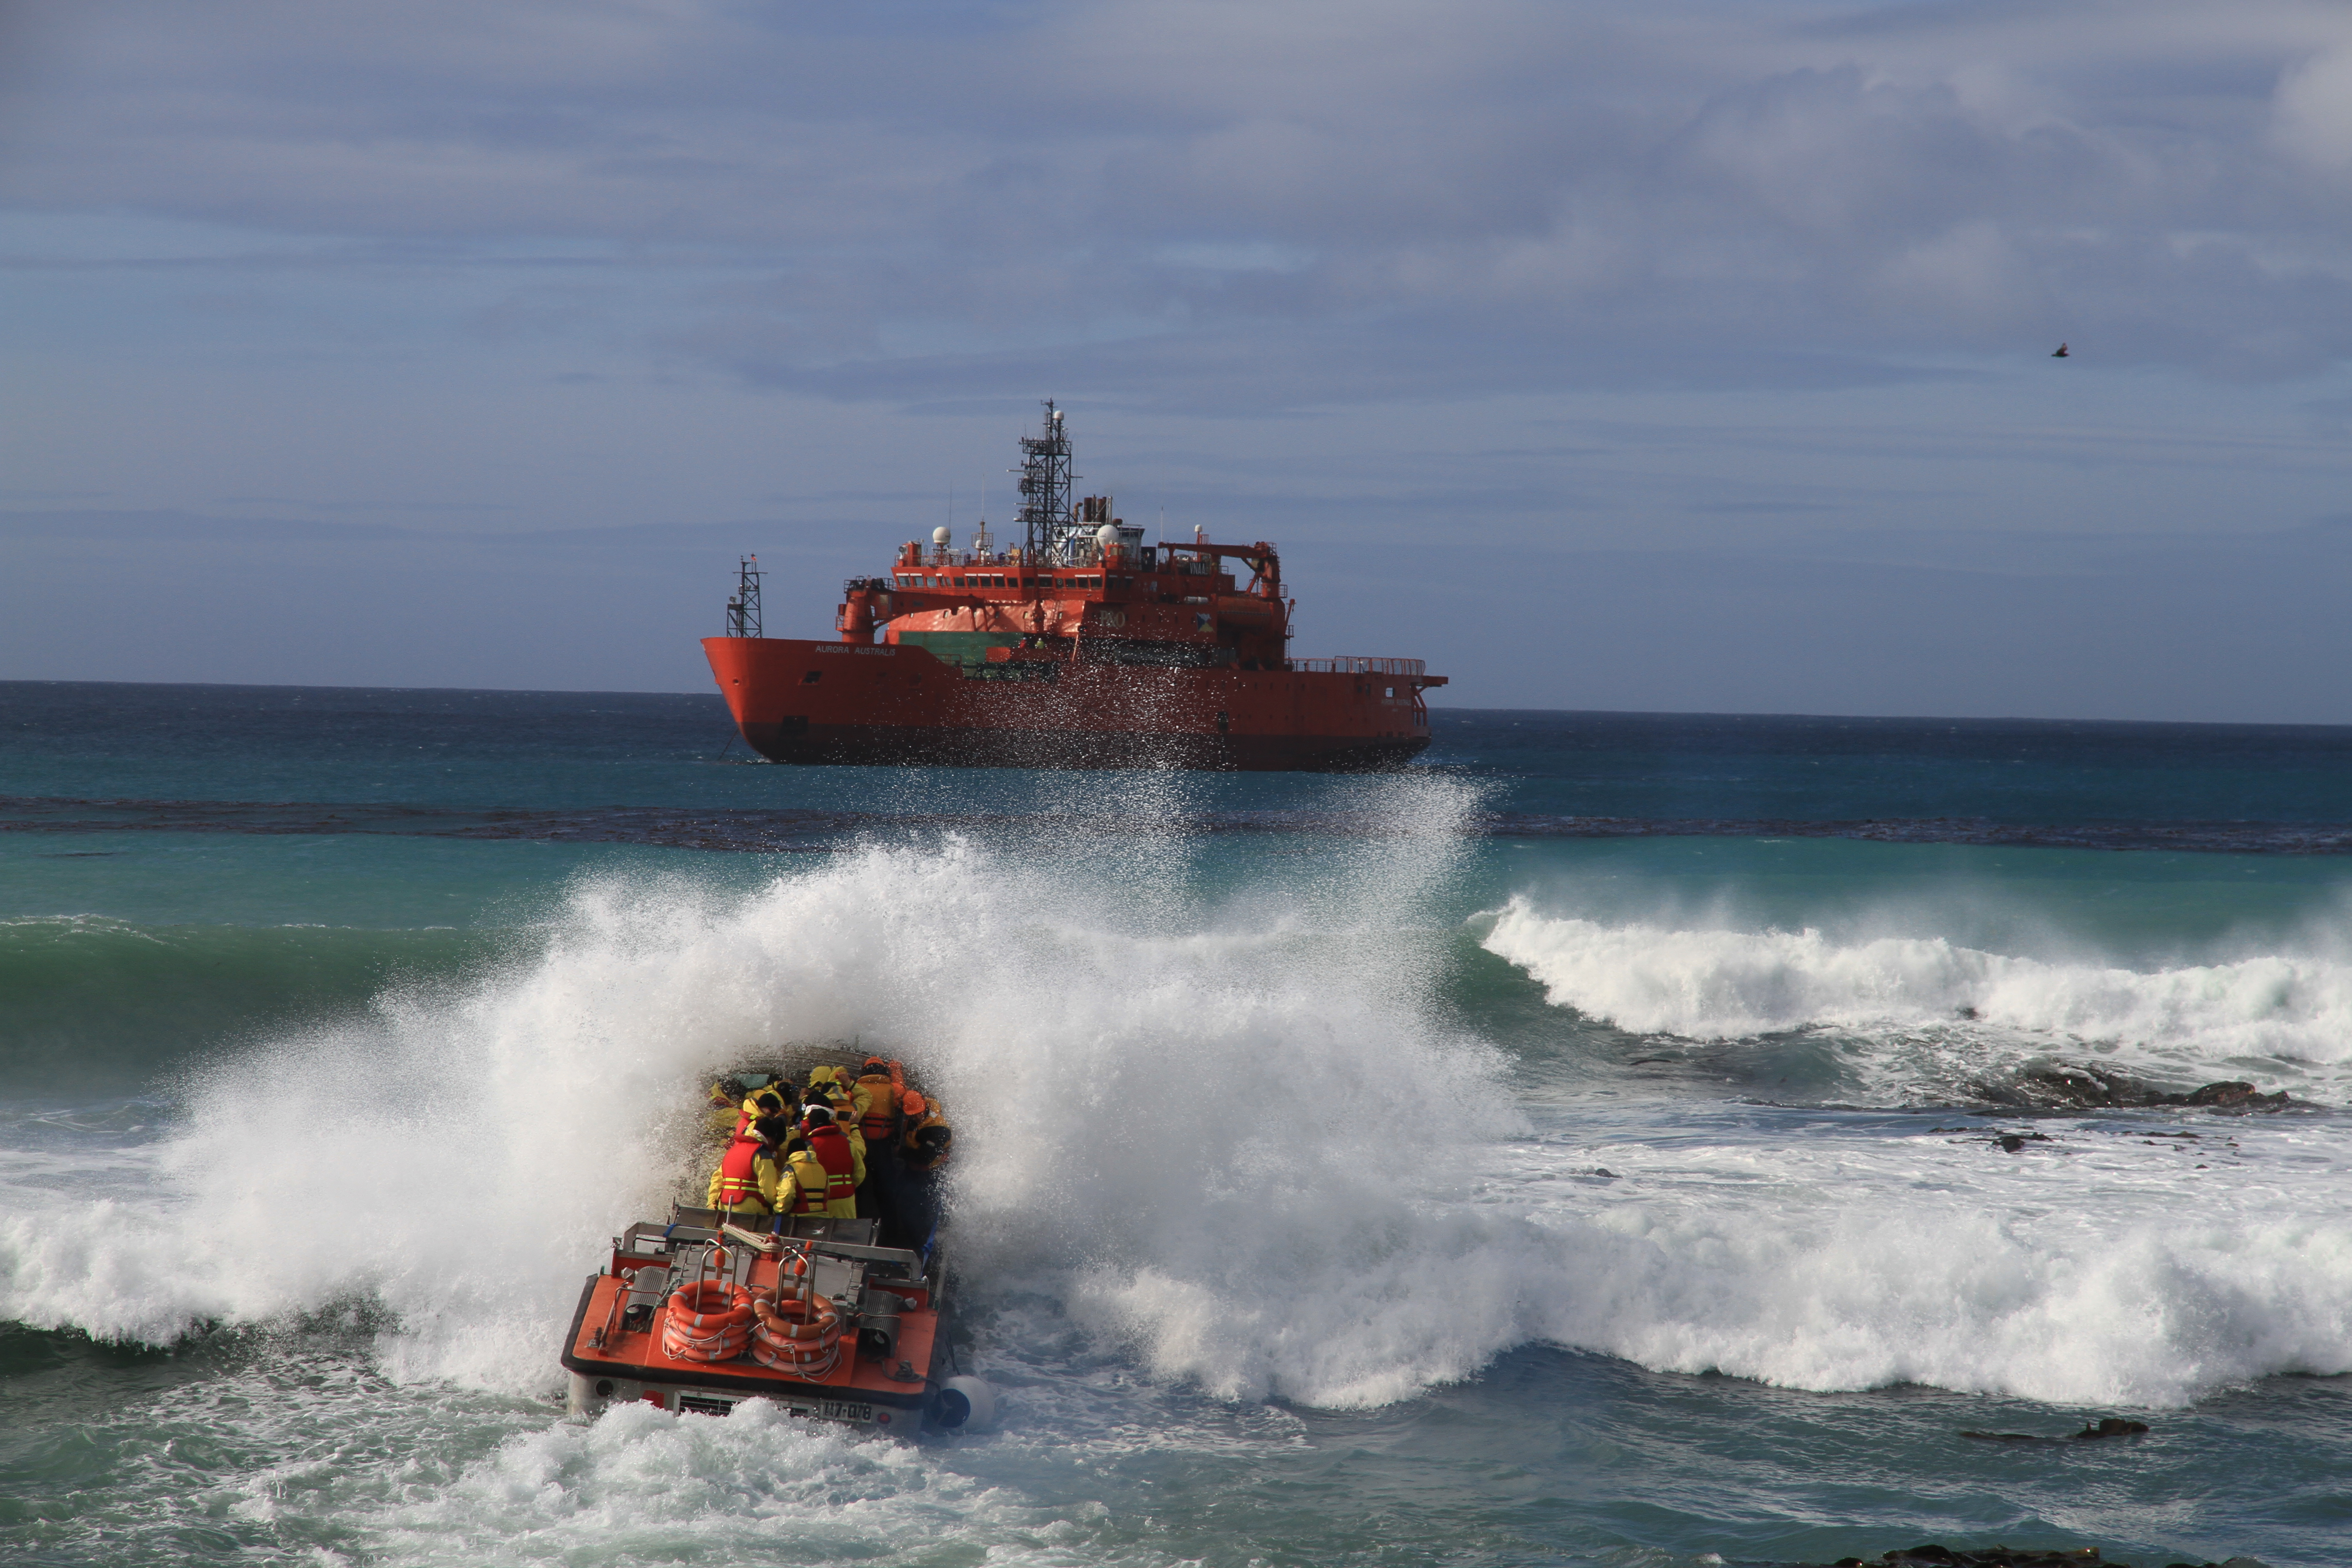  A supply vessel with FIDO team members aboard breaks waves in the Southern Ocean, departing Macquarie Island to return to the Aurora Australis. FIDO managed the Macquarie Island Cloud and Radiation Experiment (MICRE), a field campaign from 2016 to 2018 that gathered observations over a complete seasonal cycle. A supply vessel with FIDO team members aboard breaks waves in the Southern Ocean, returning to the Aurora Australis from Macquarie Island. FIDO managed the Macquarie Island Cloud and Radiation Experiment (MICRE), a field campaign from 2016 to 2018 that gathered observations over a complete seasonal cycle.